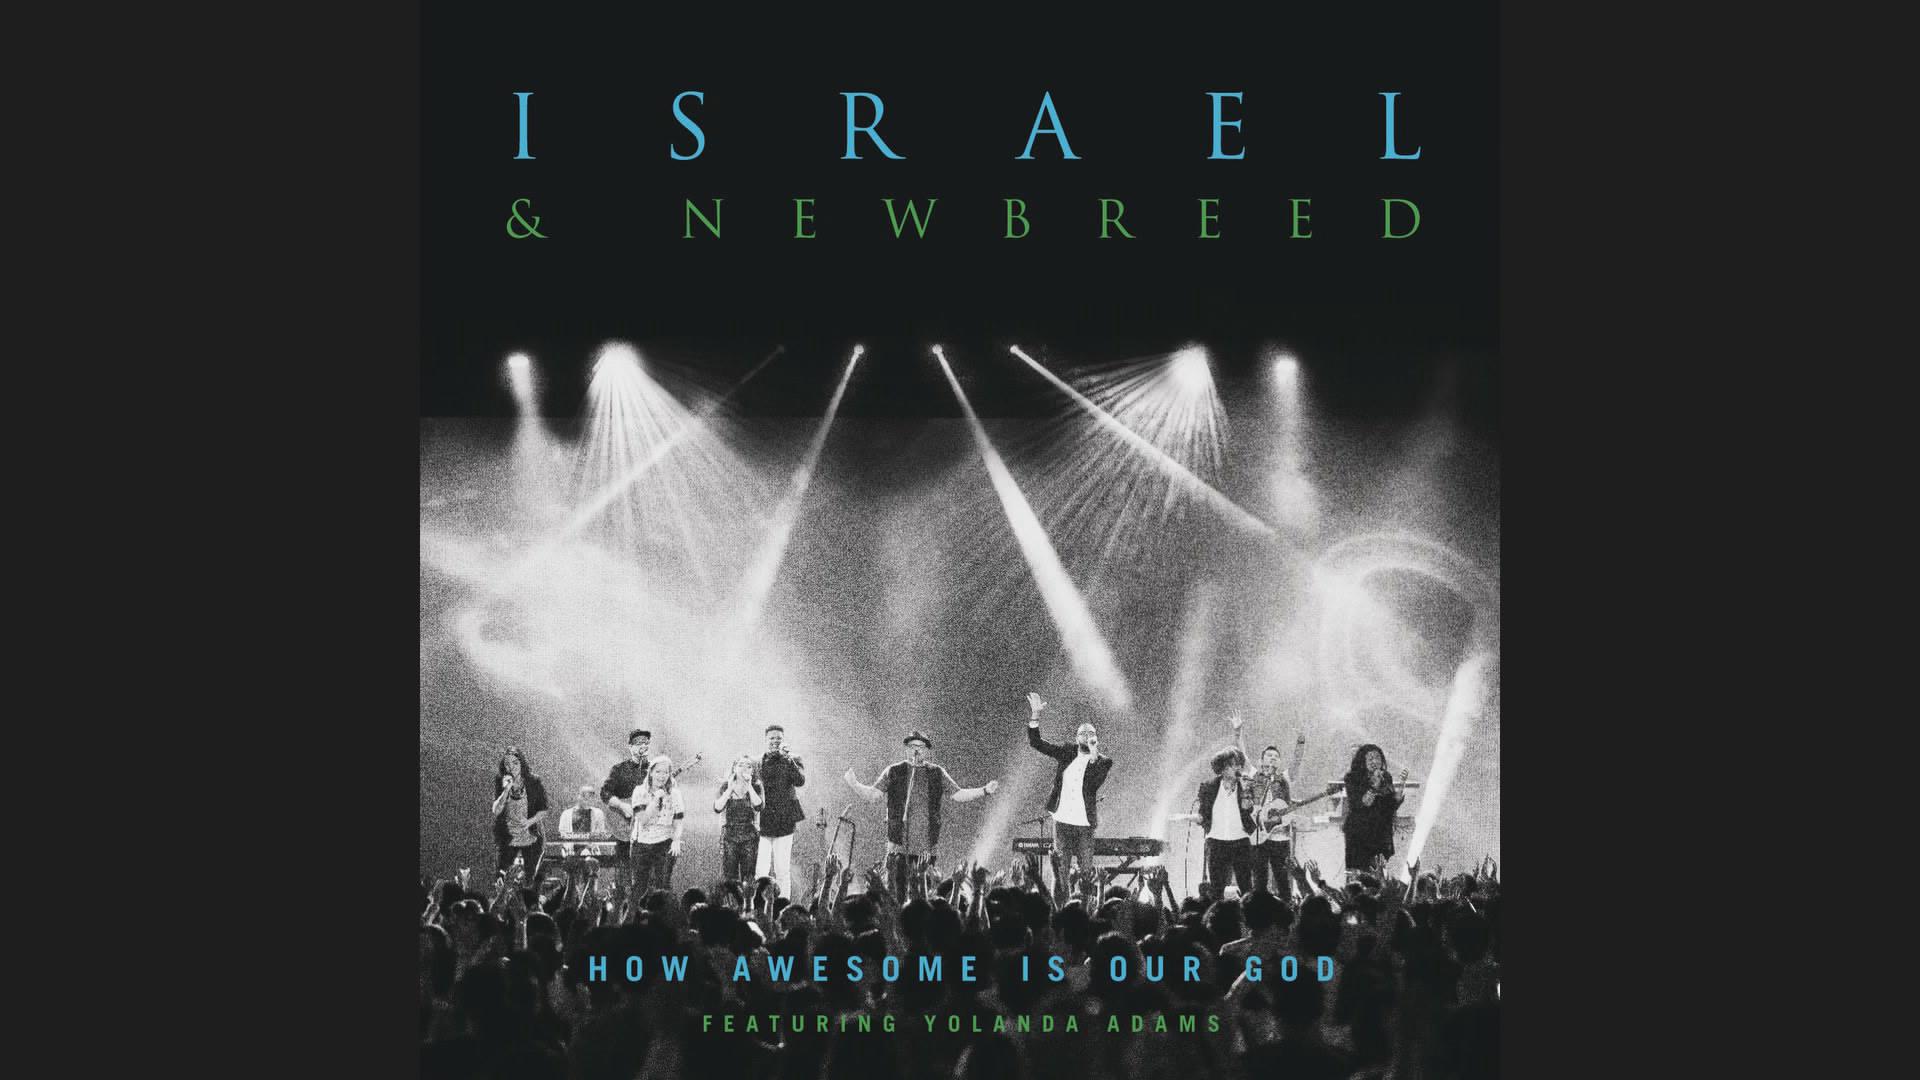 Israel & New Breed - How Awesome Is Our God (Psuedo Video)